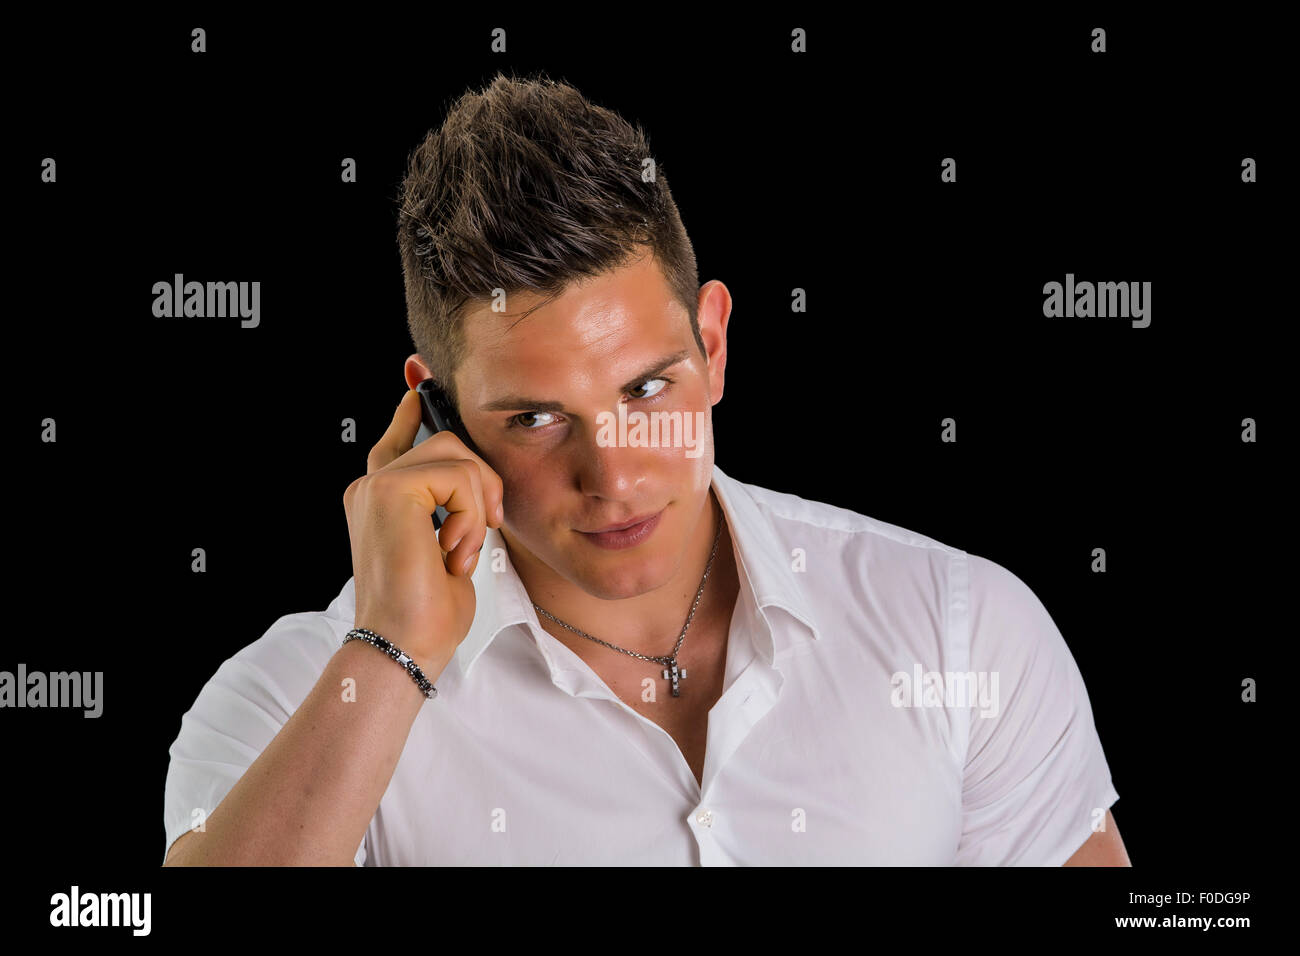 Handsome hunky young man talking on cell phone, isolated on black. Looking to a side Stock Photo